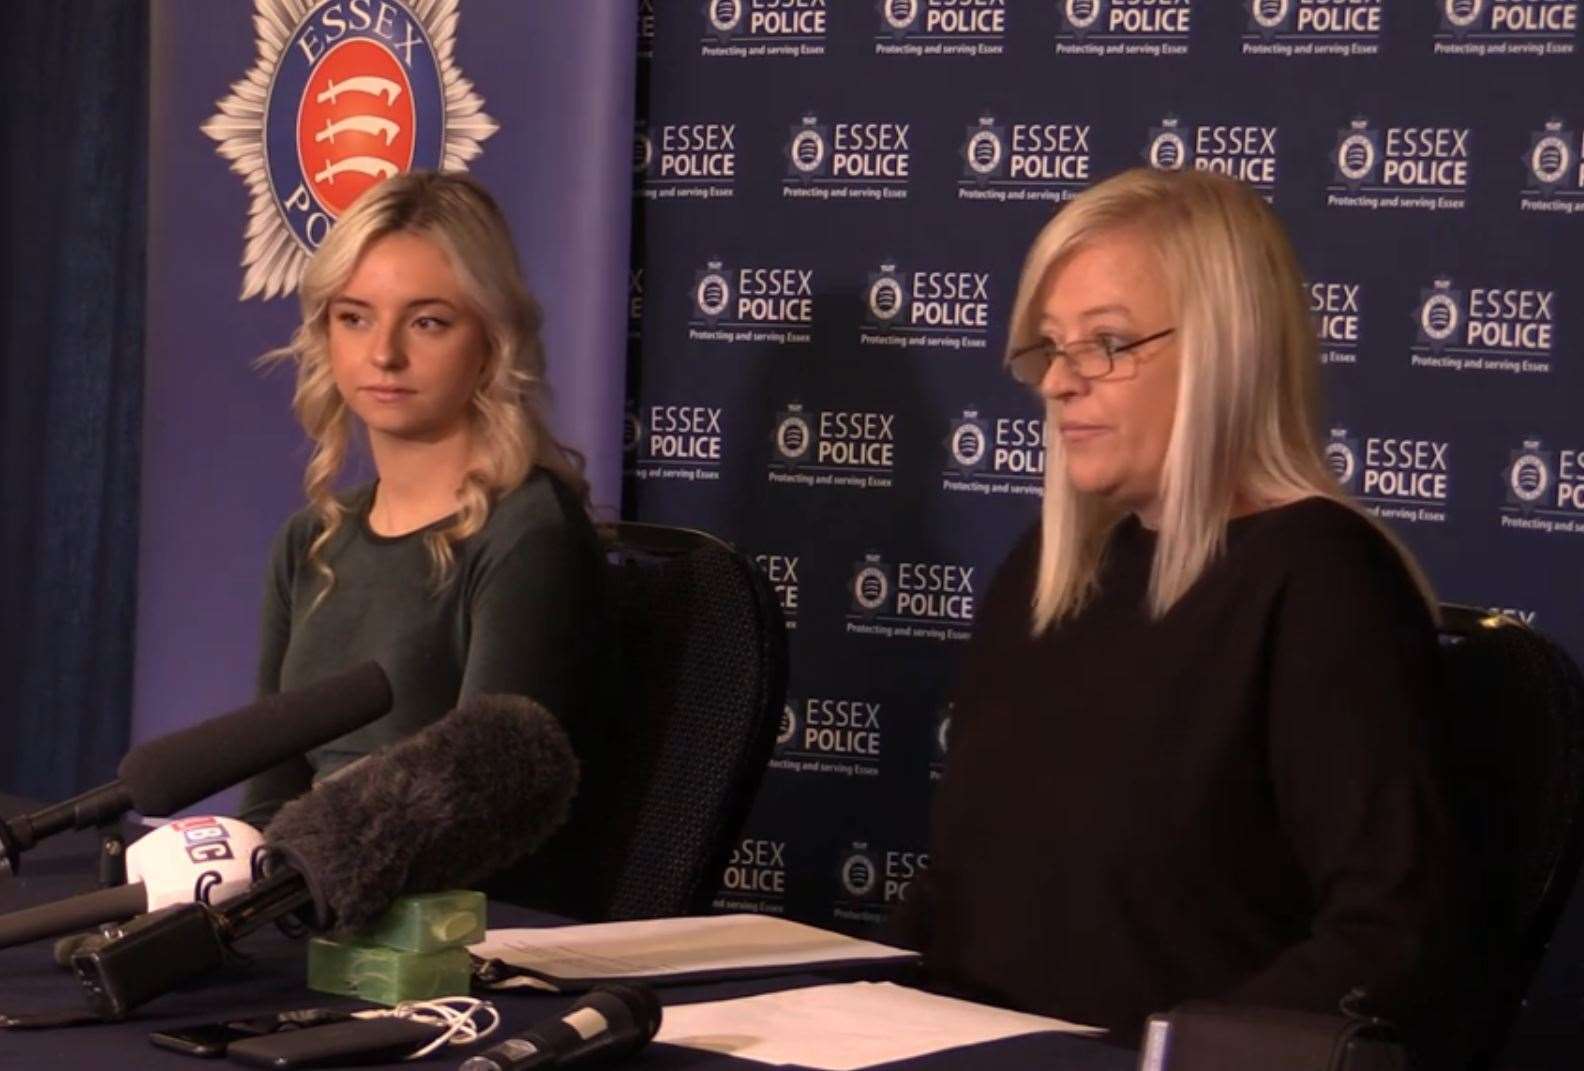 Nicole Dobbin, the widow of Simon Dobbin, speaking at an Essex Police press conference, alongside their daughter, Emily Dobbin, 22, in 2021. (Sam Russell/PA)